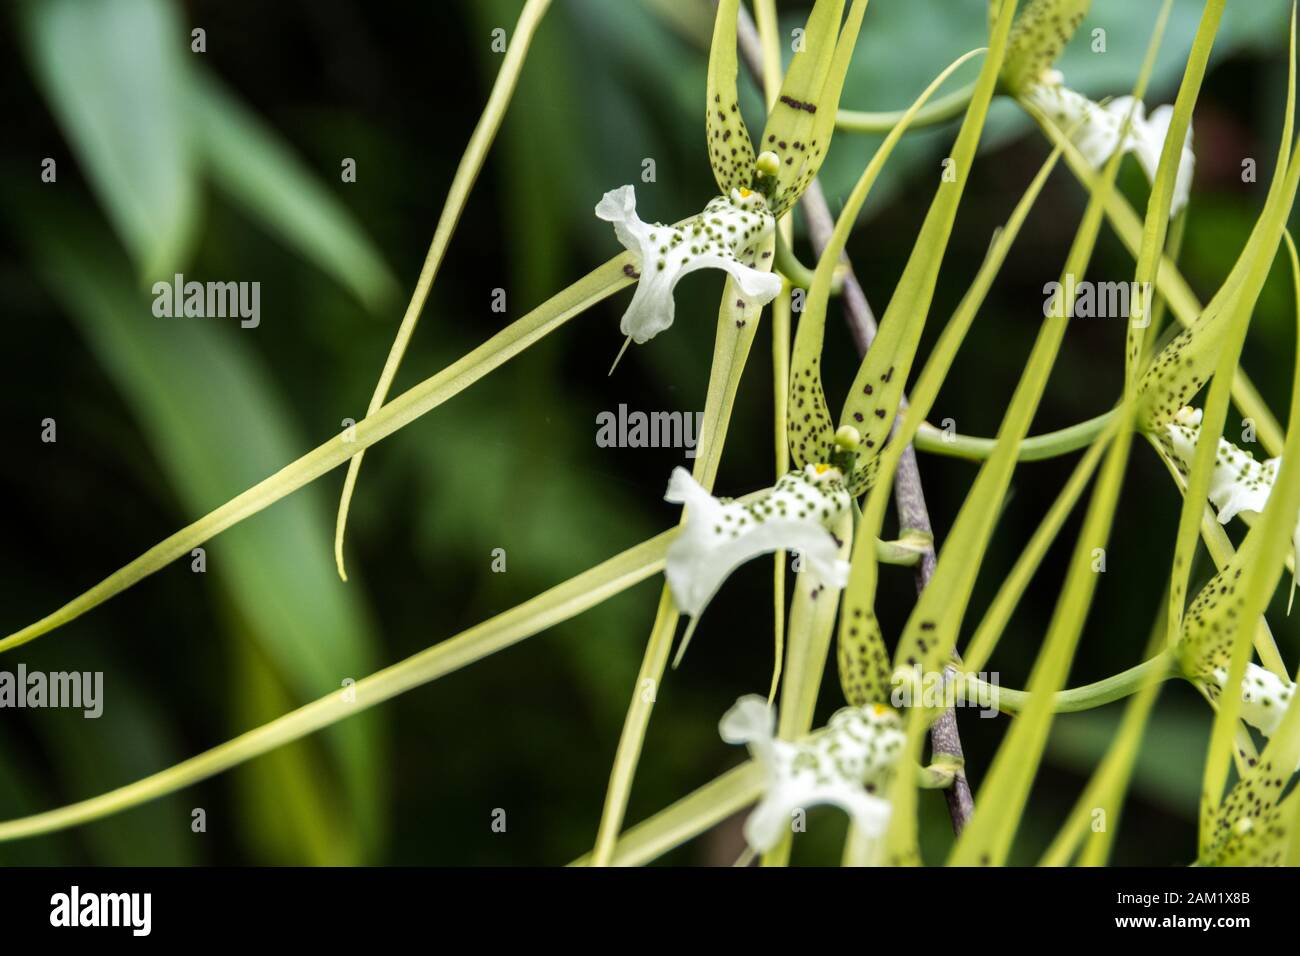 Exotic and beautiful green plant with spots Stock Photo